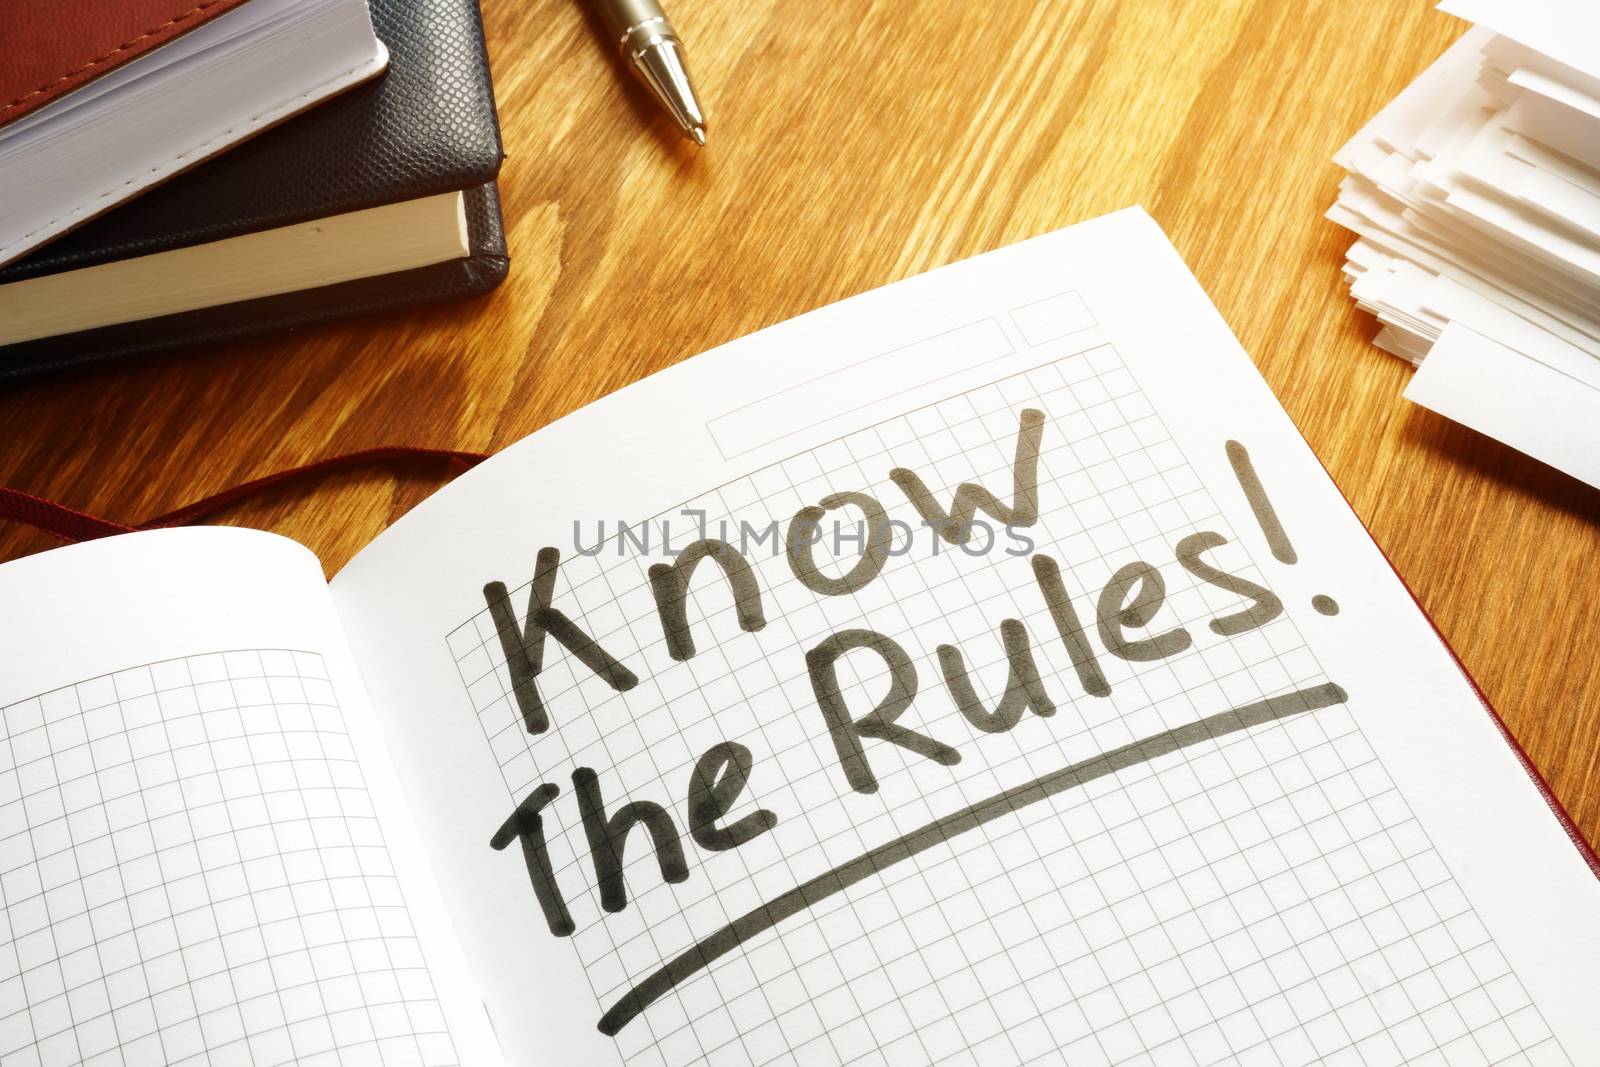 Know the rules of business law written on notebook.